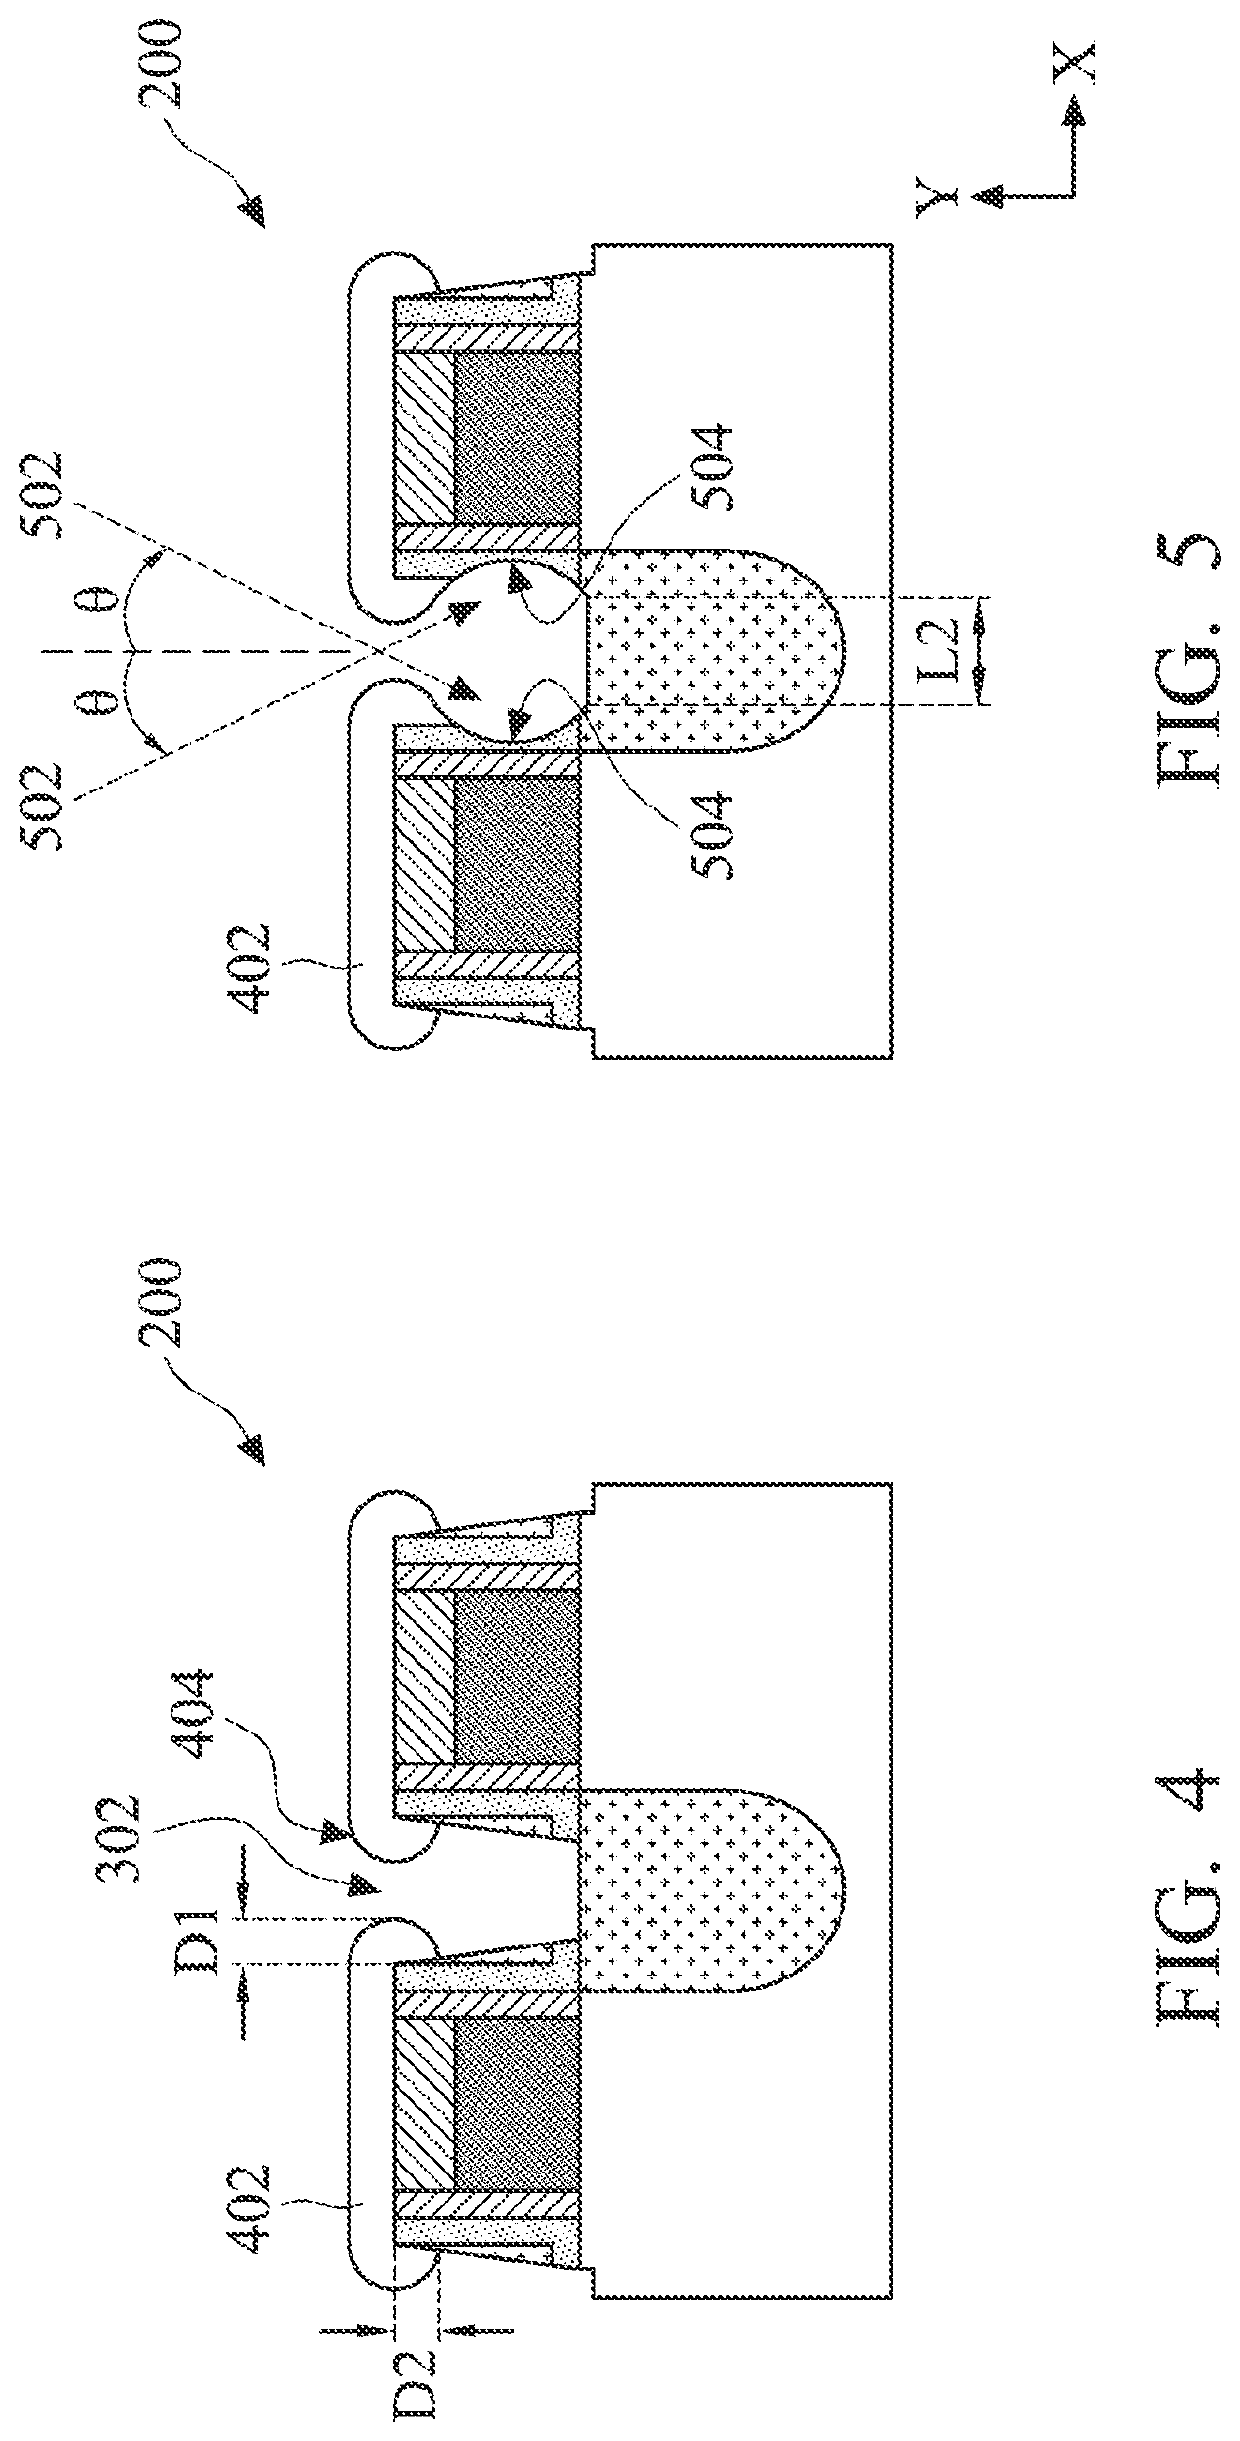 Contact air gap formation and structures thereof